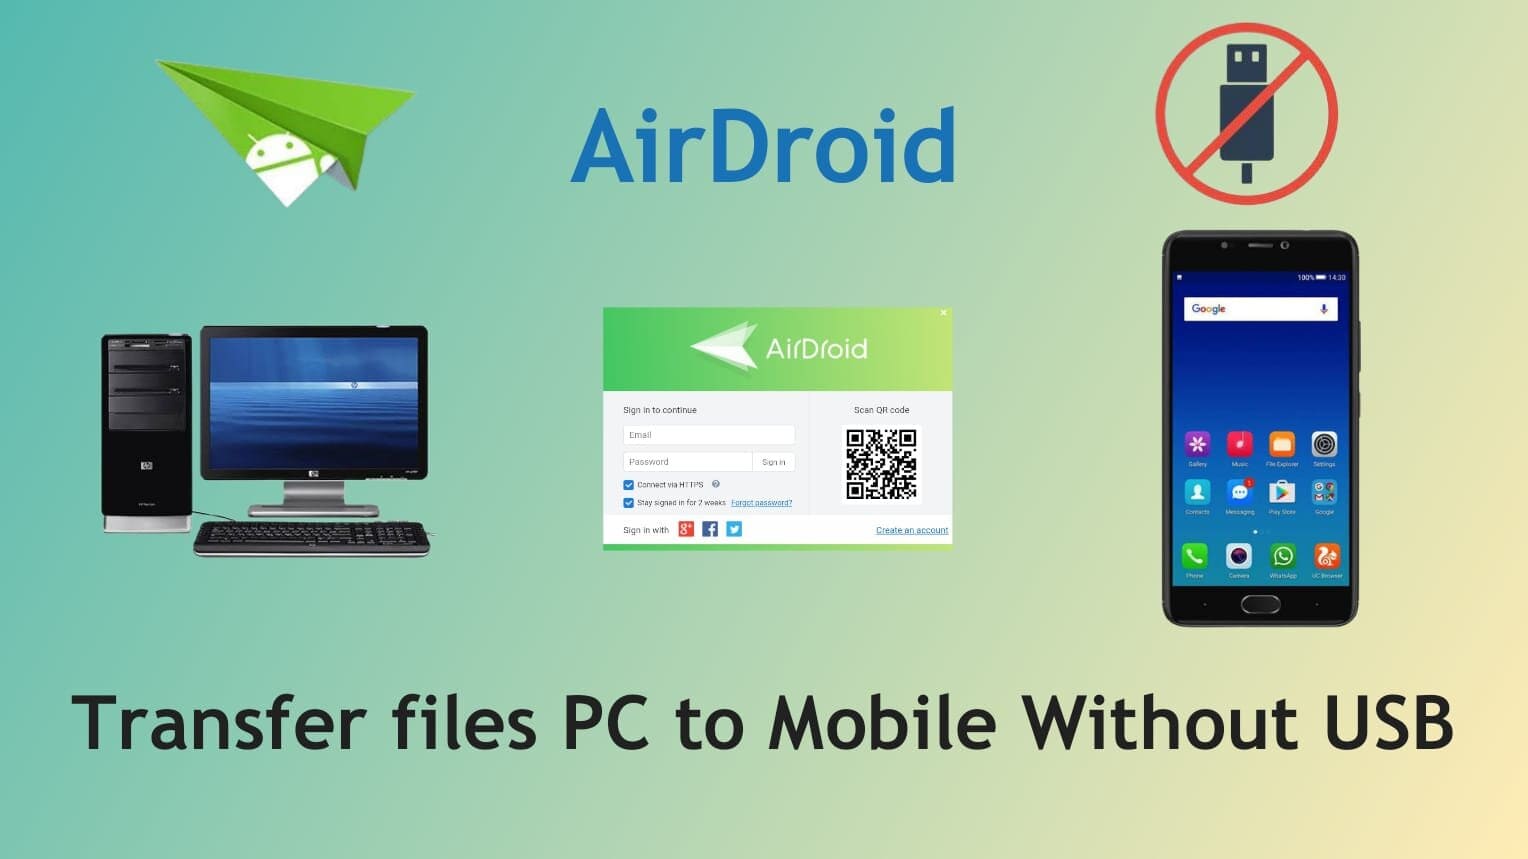 Transfer files from PC to Mobile without USB